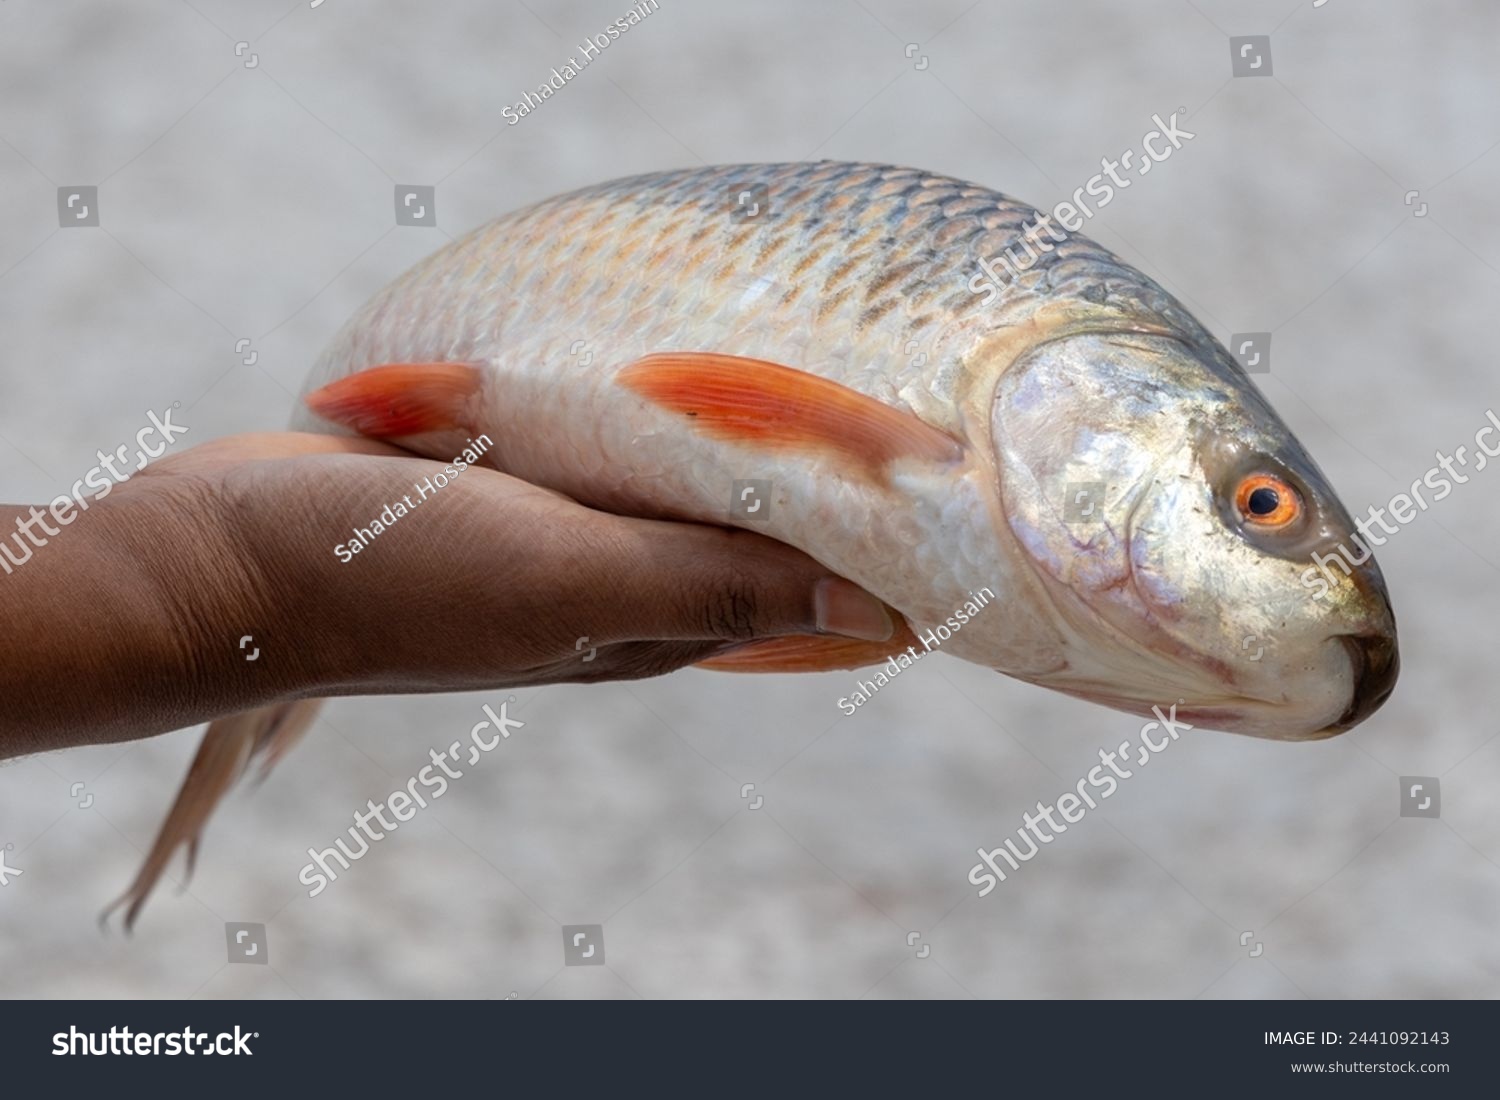 Fresh raw Rui fish in a woman's hand with beautiful blurred background. This fish is also called Rohu (Labeo rohita), Indian carp, Ruhi, or Roho labeo.  #2441092143